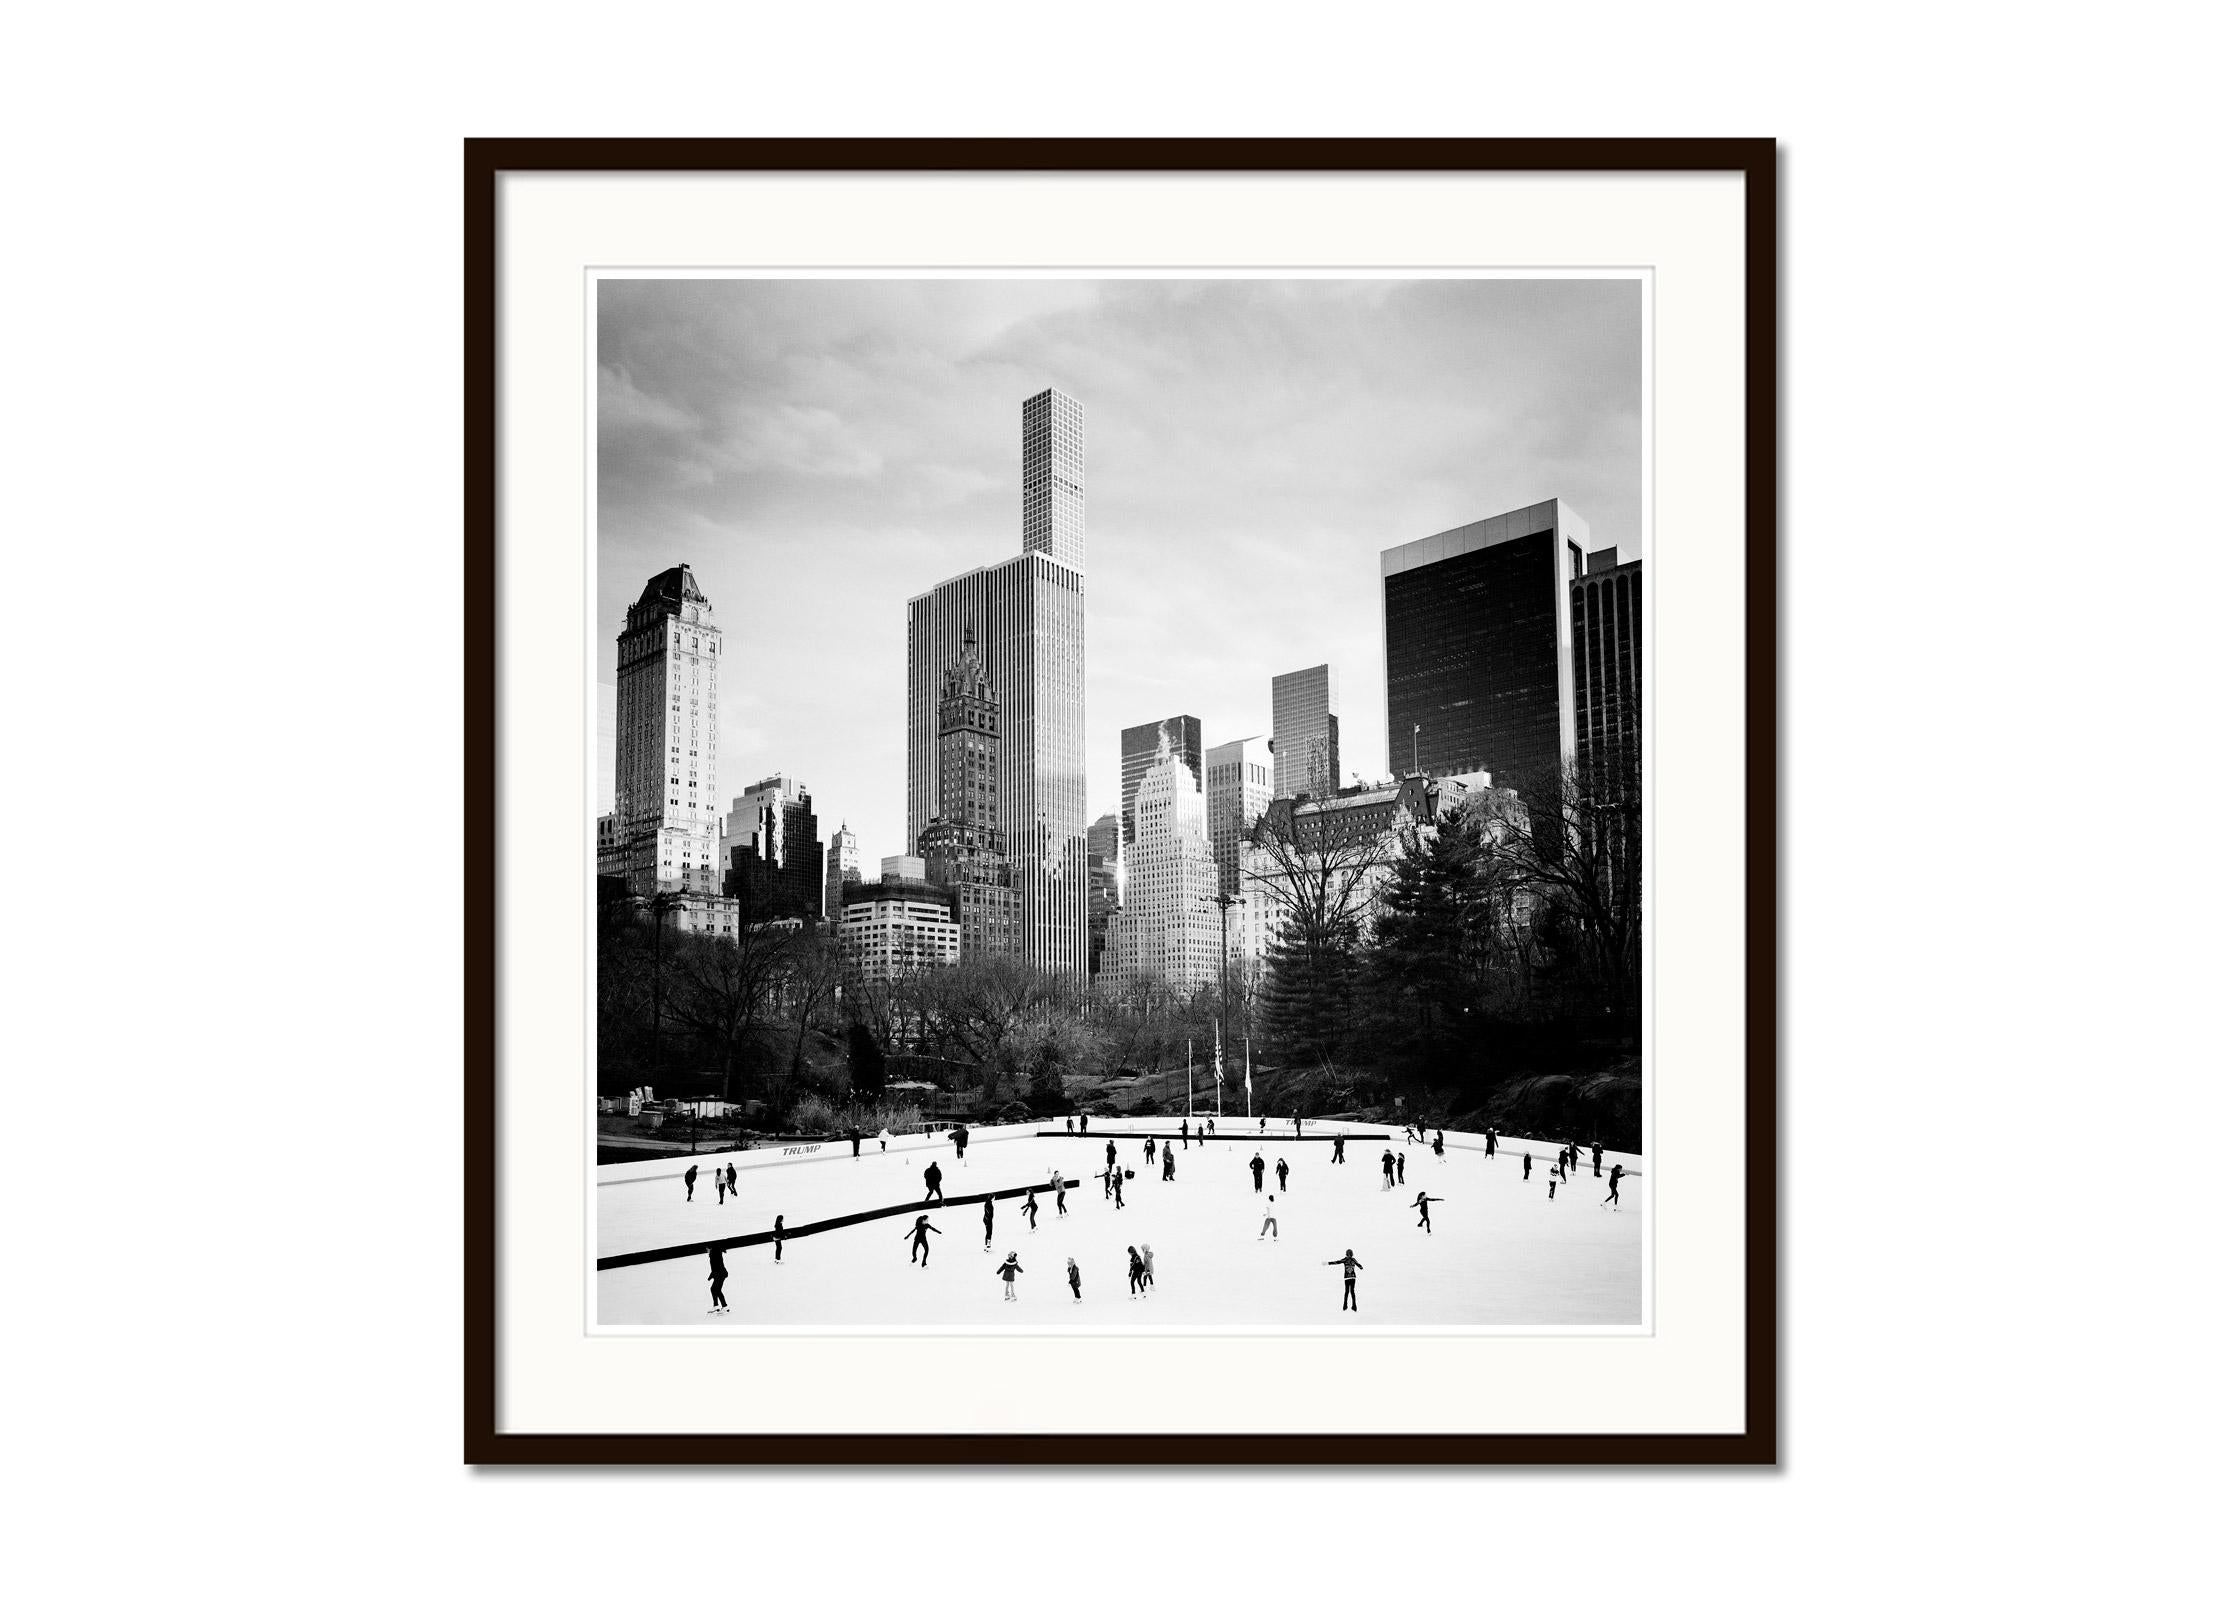 Black and white fine art cityscape - landscape photography. Ice Skating, Central Park, New York City, USA. Archival pigment ink print, edition of 9. Signed, titled, dated and numbered by artist. Certificate of authenticity included. Printed with 4cm